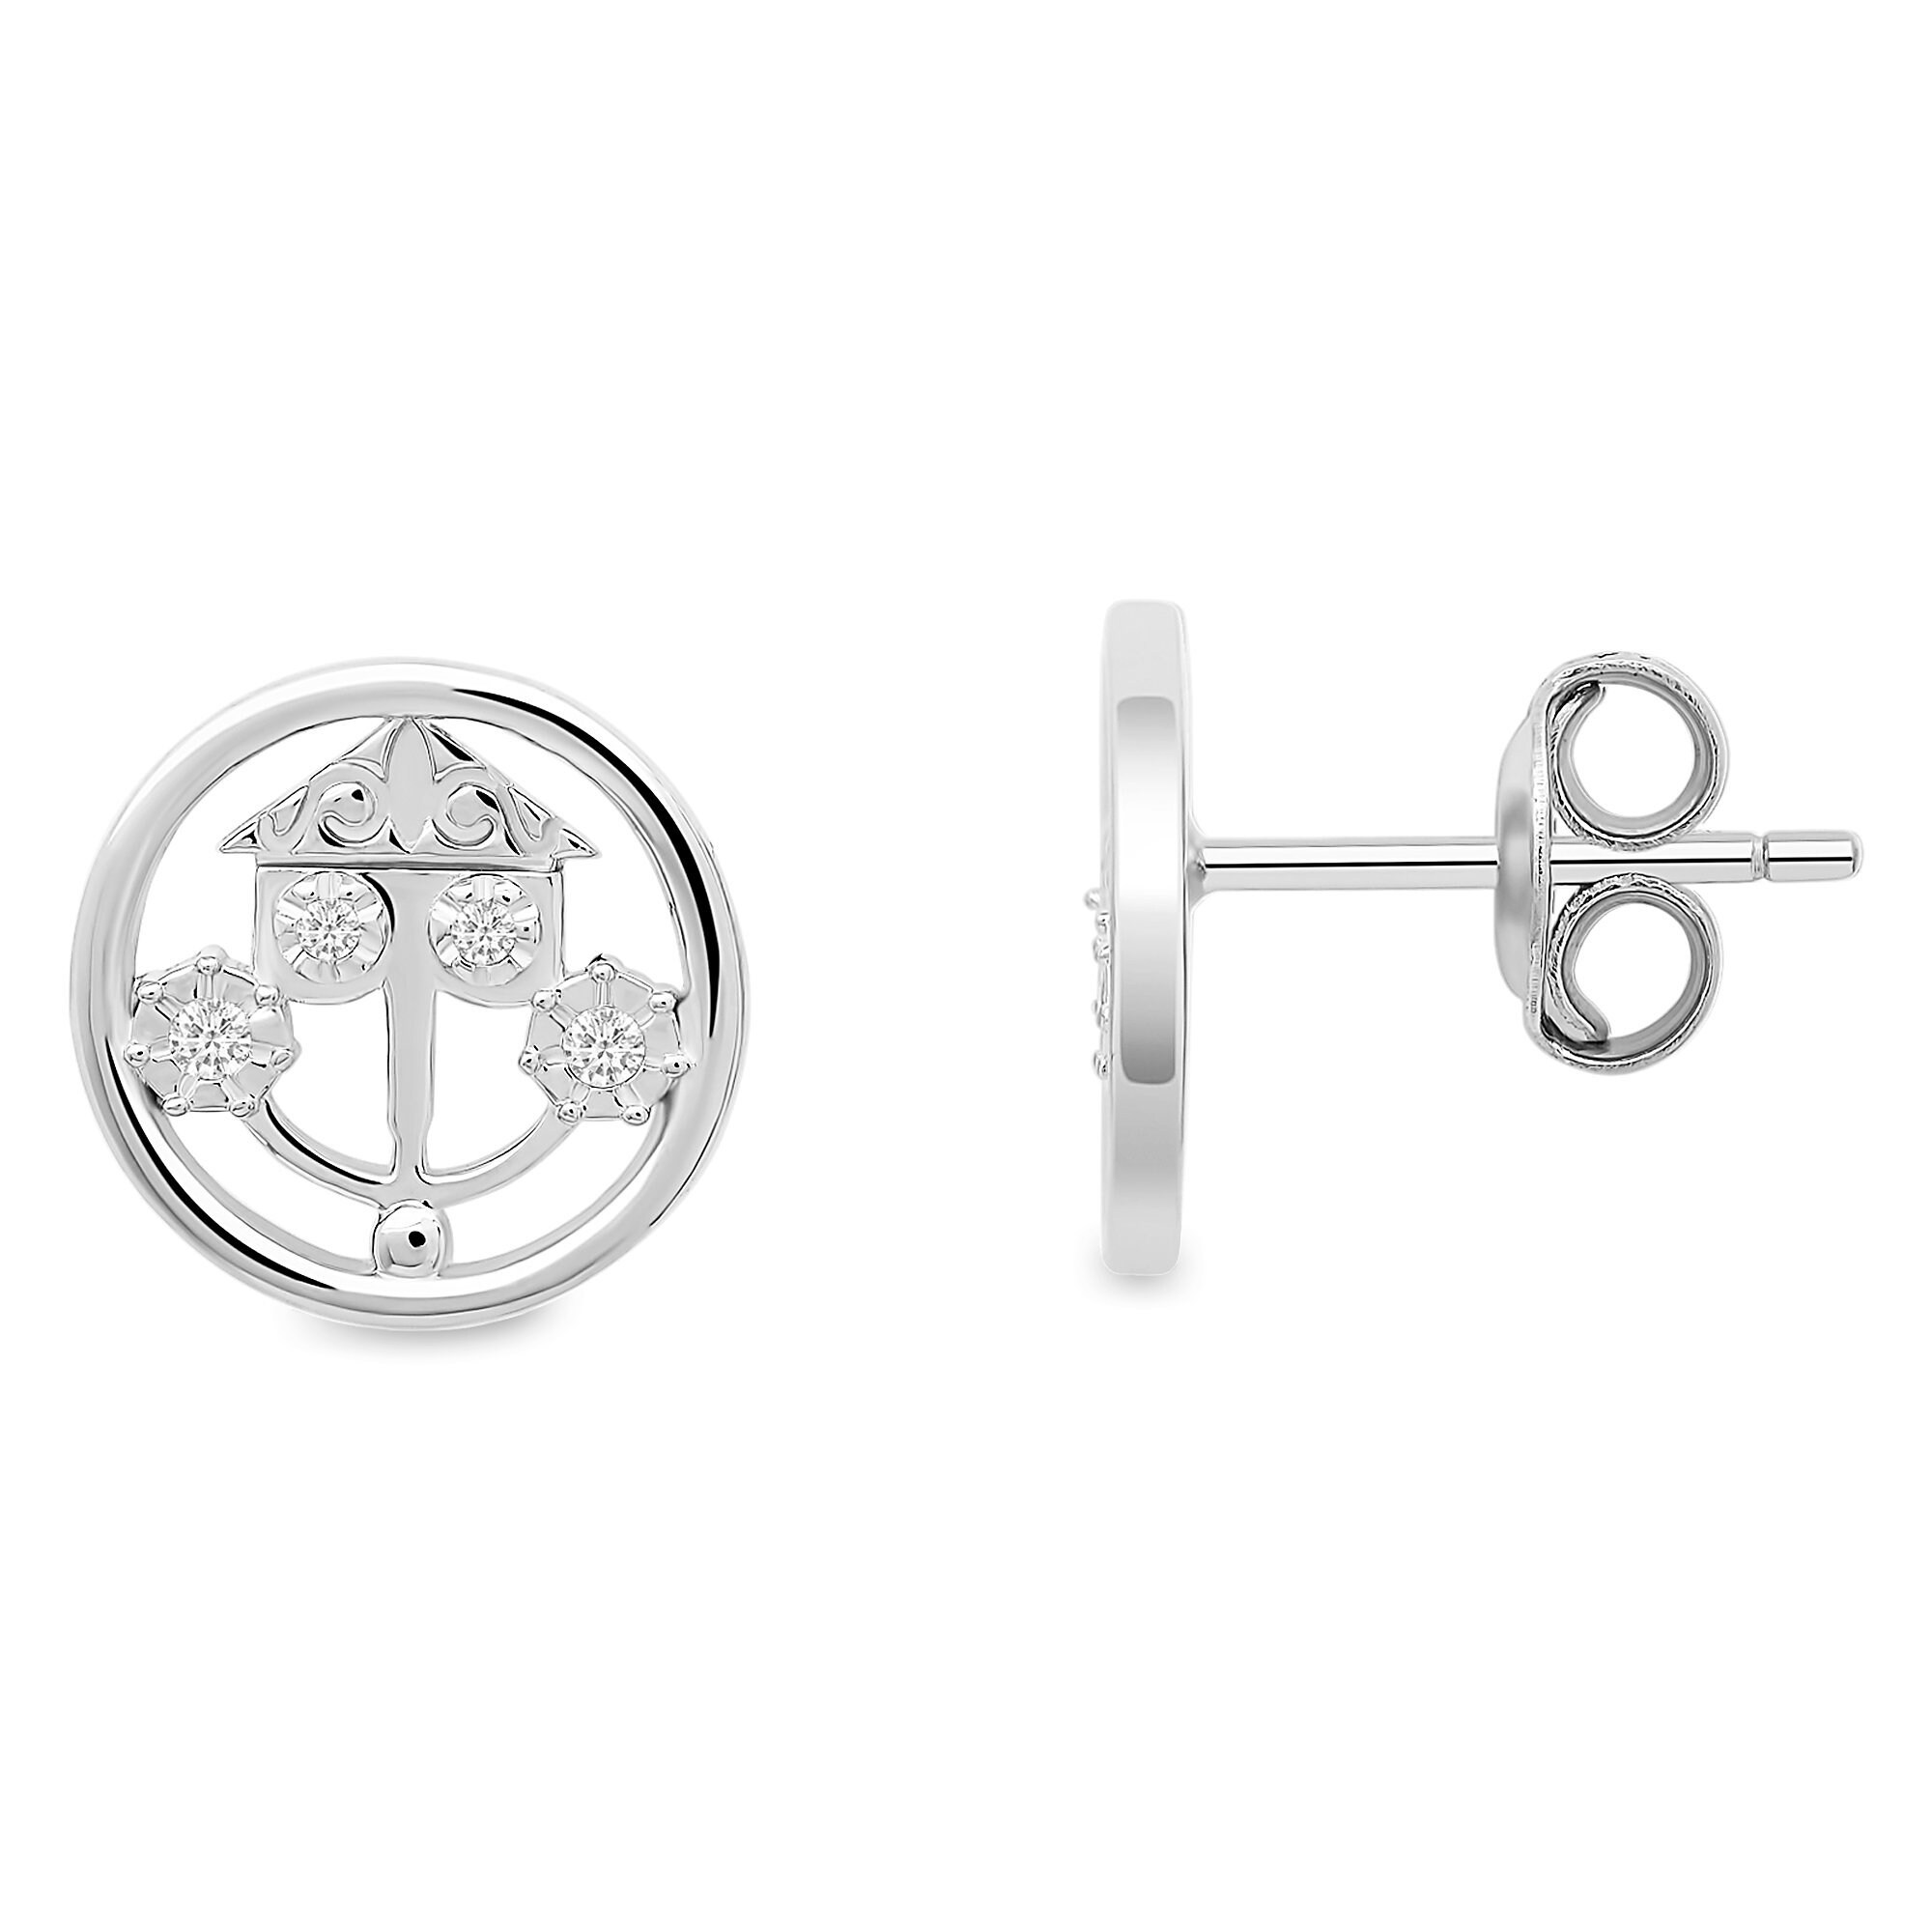 Disney It S A Small World Clockface Earrings By Crislu Is Available Online For Purchase Dis Merchandise News